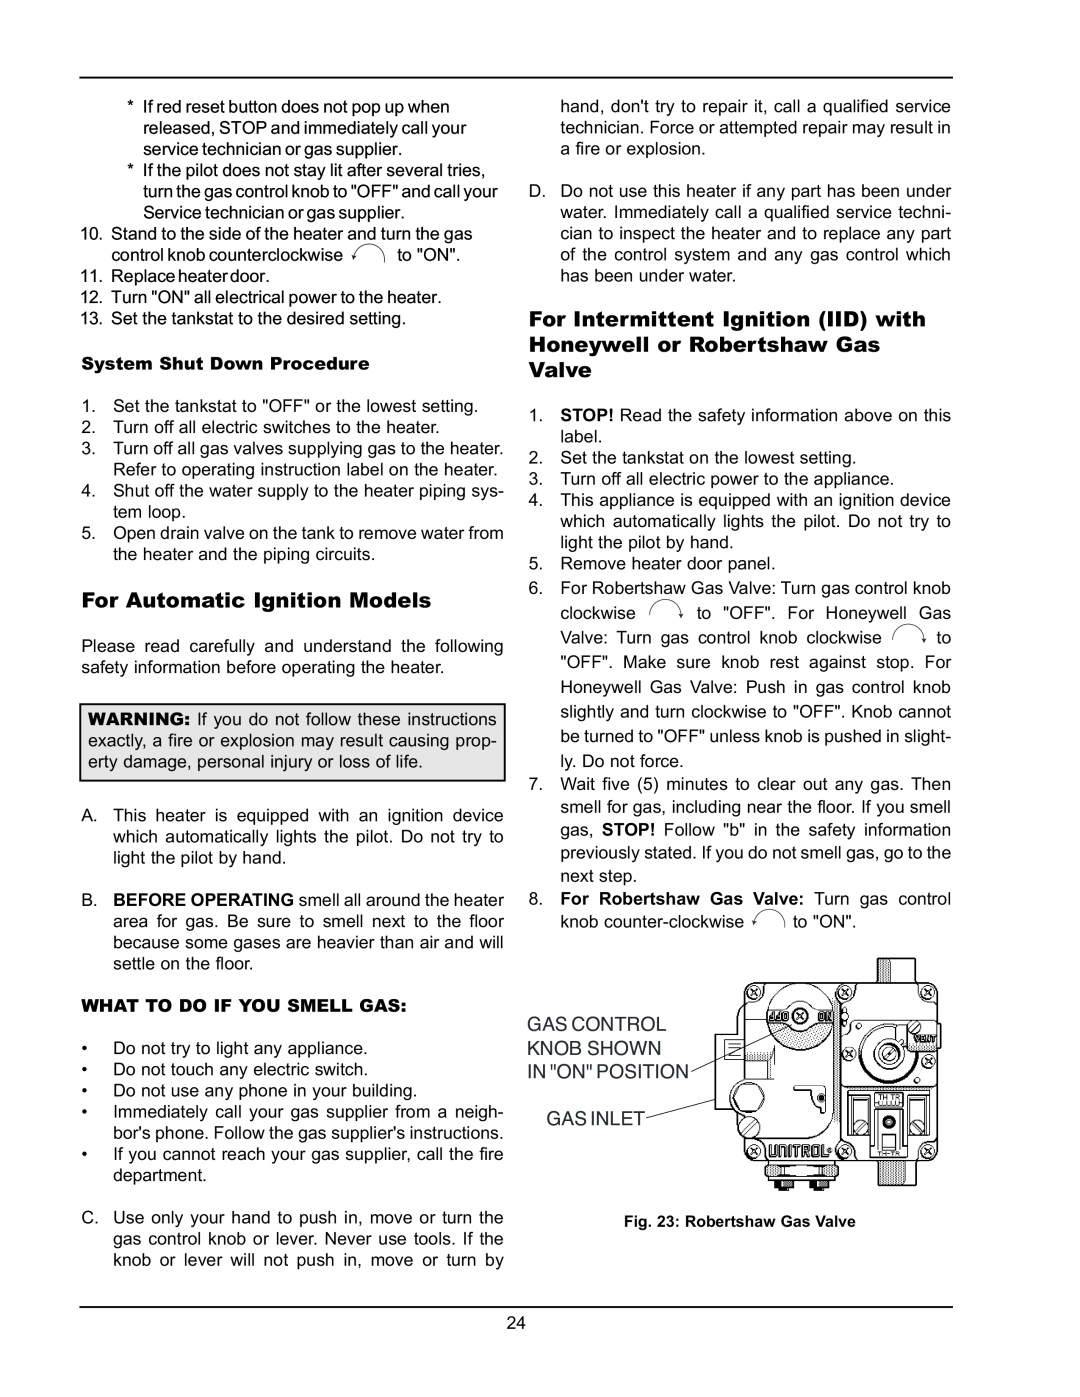 Raypak 2600401 For Automatic Ignition Models, Gas Control Knob Shown In On Position Gas Inlet, System Shut Down Procedure 